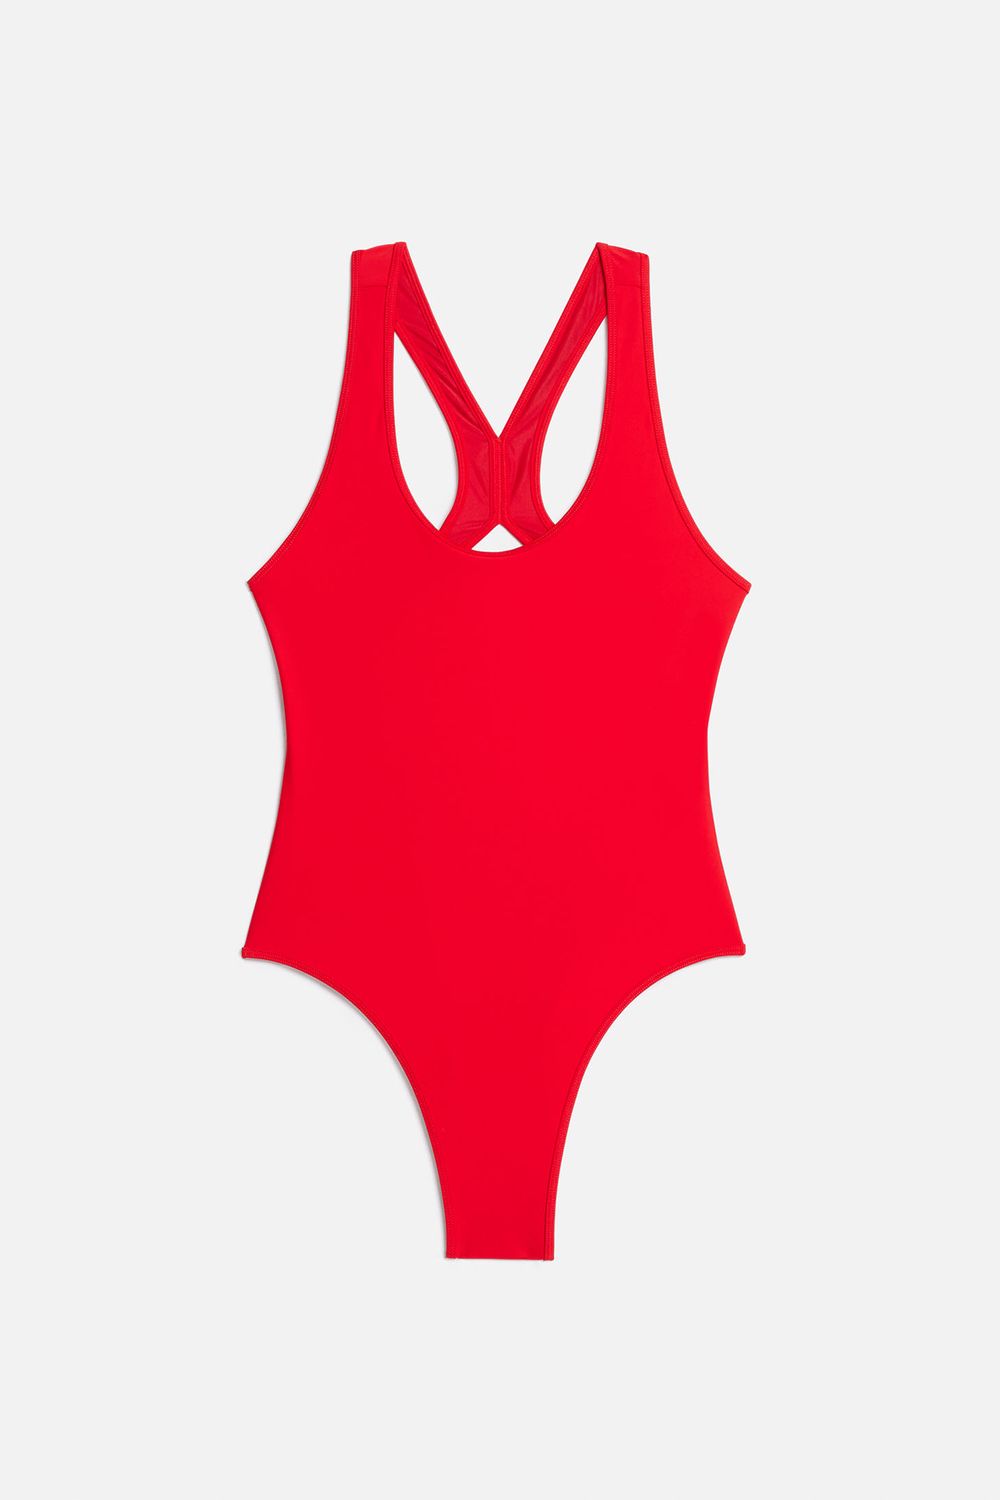 AMI ALEXANDRE MATTIUSSI ONE PIECE SWIMSUIT RED FOR WOMEN